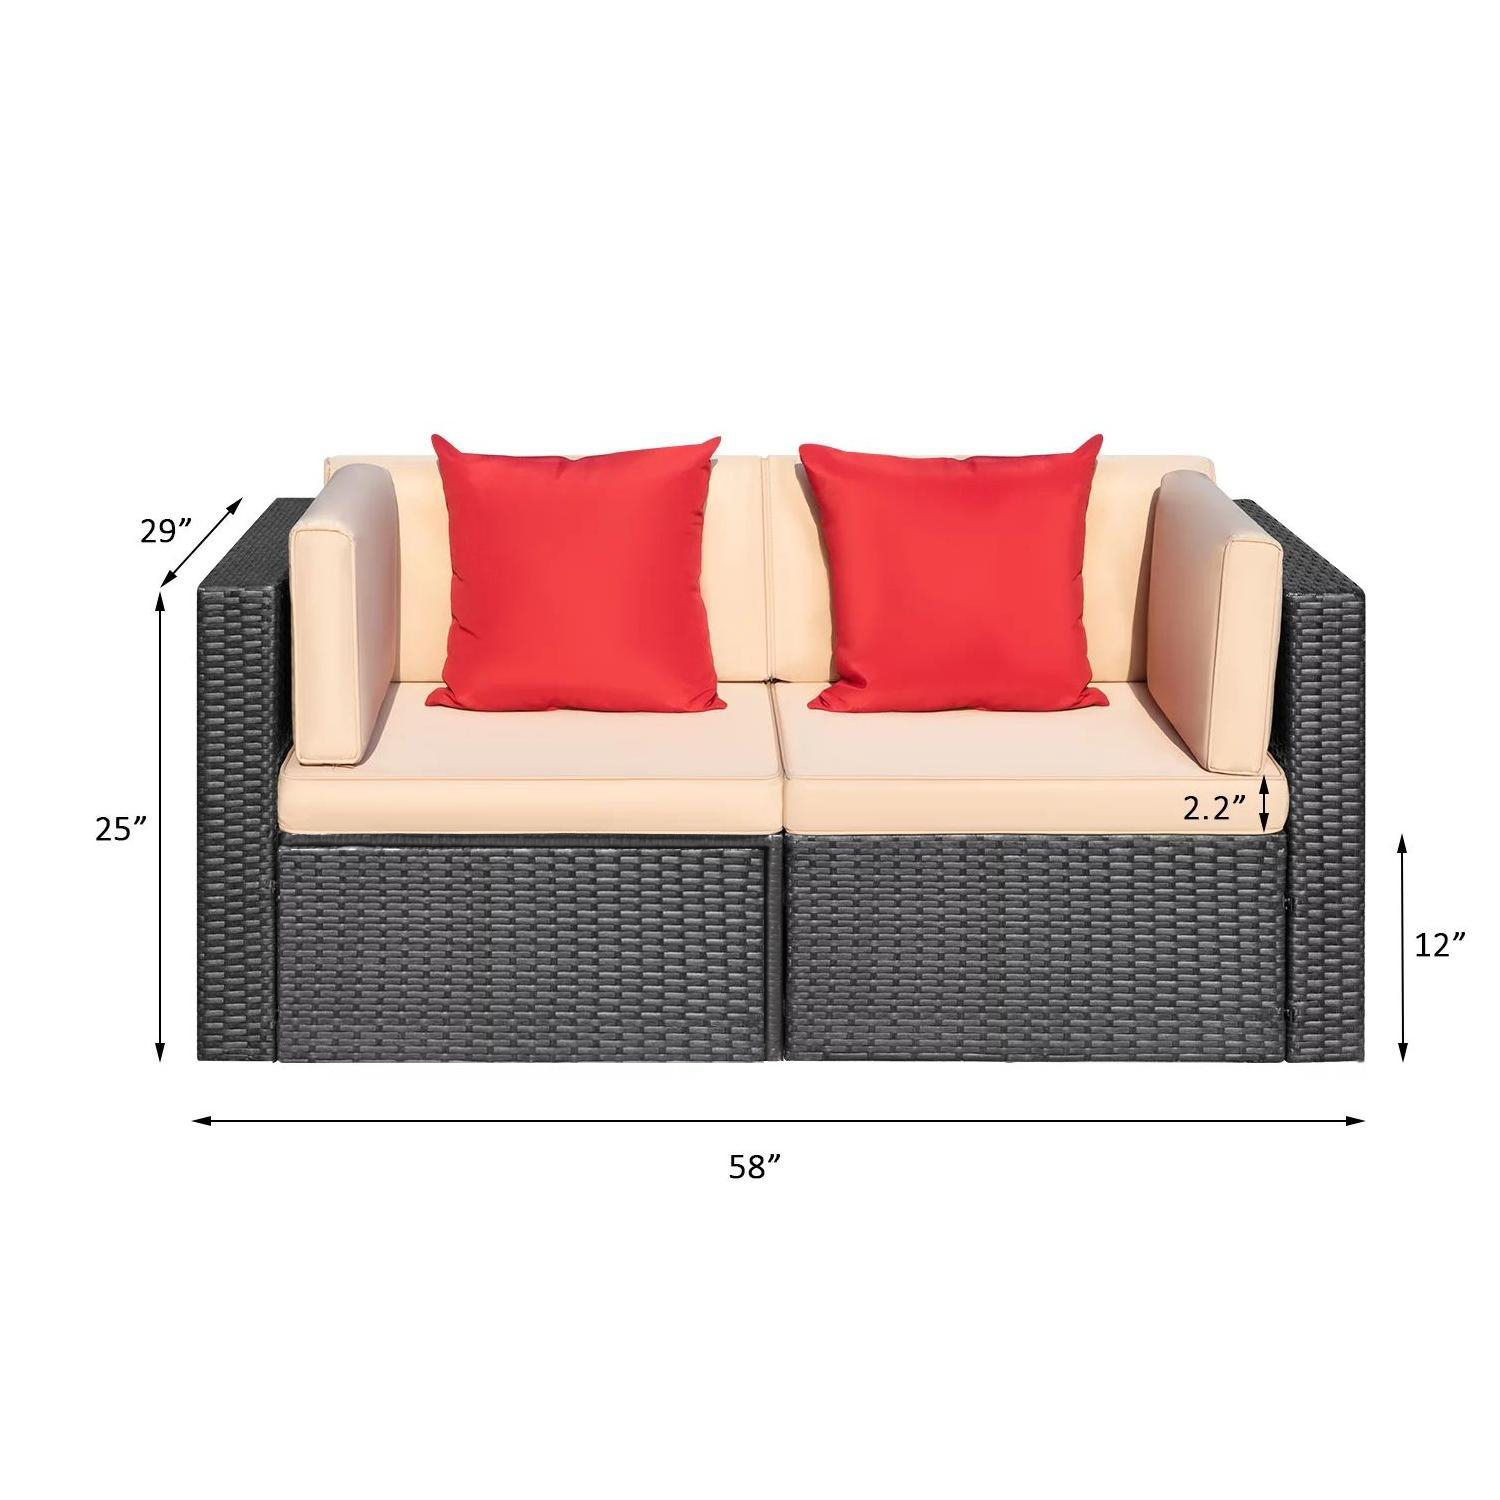 Lacoo 2 Pieces Patio Loveseat Outdoor Sectional Sofa Patio Conversation Set for Small Area, Beige - image 5 of 5